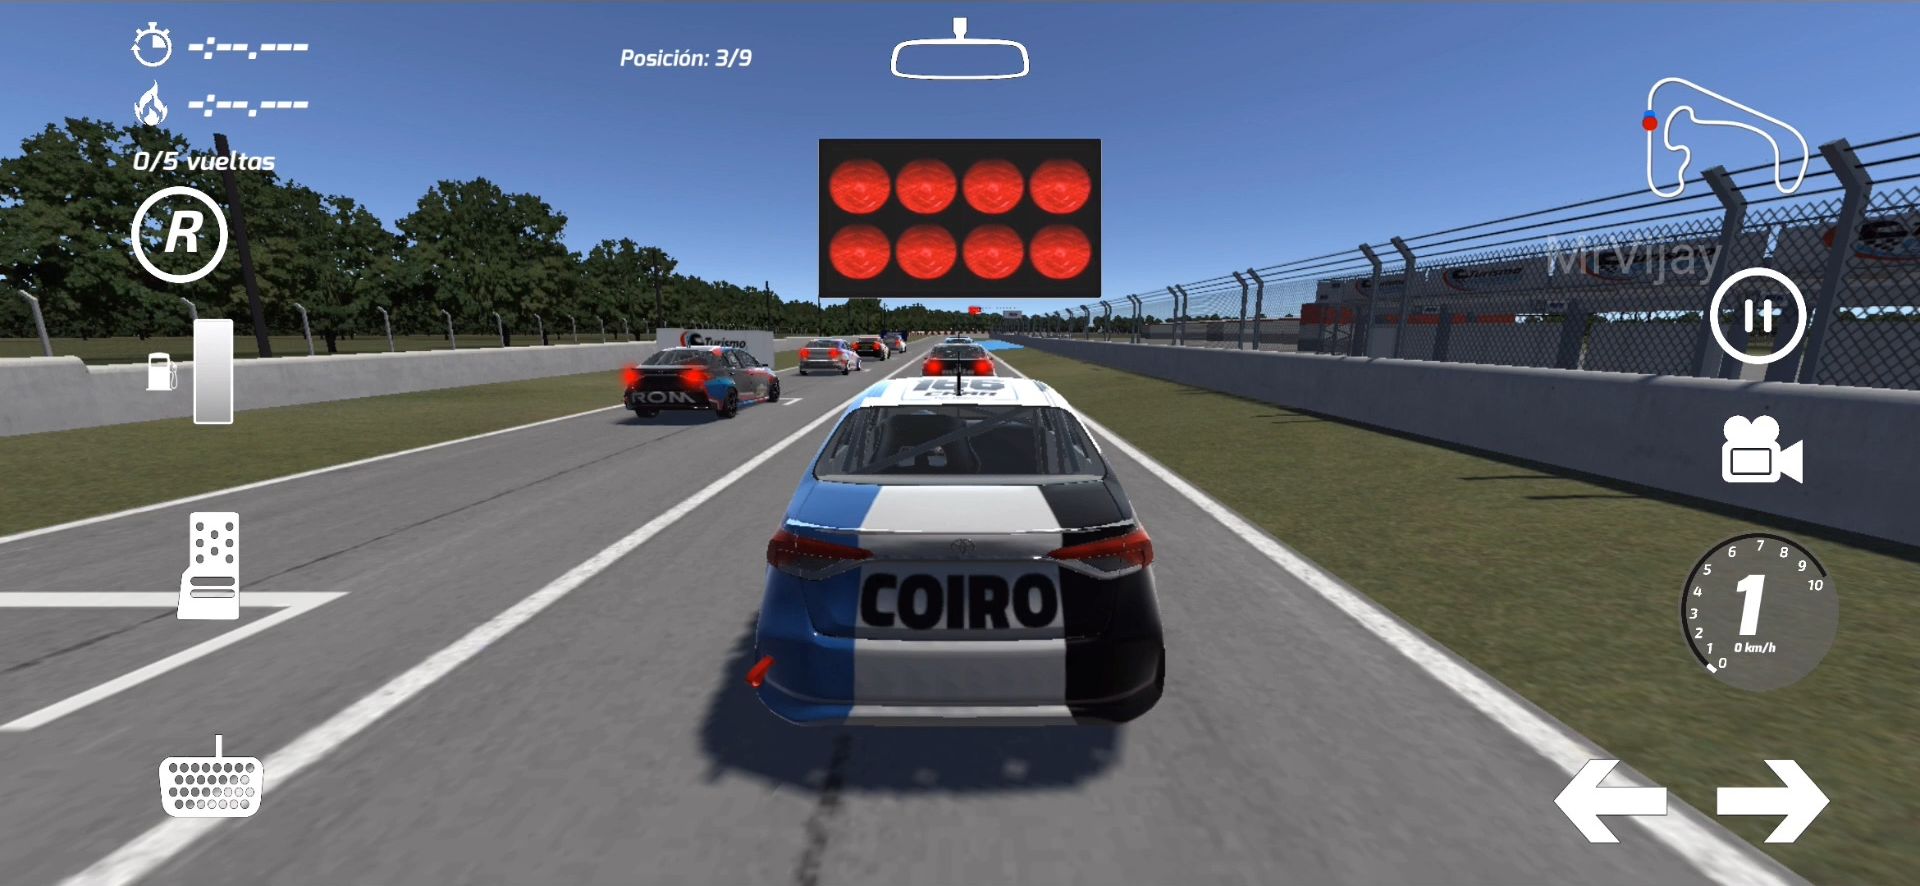 Full version of Android Racing game apk Turismo Nacional for tablet and phone.